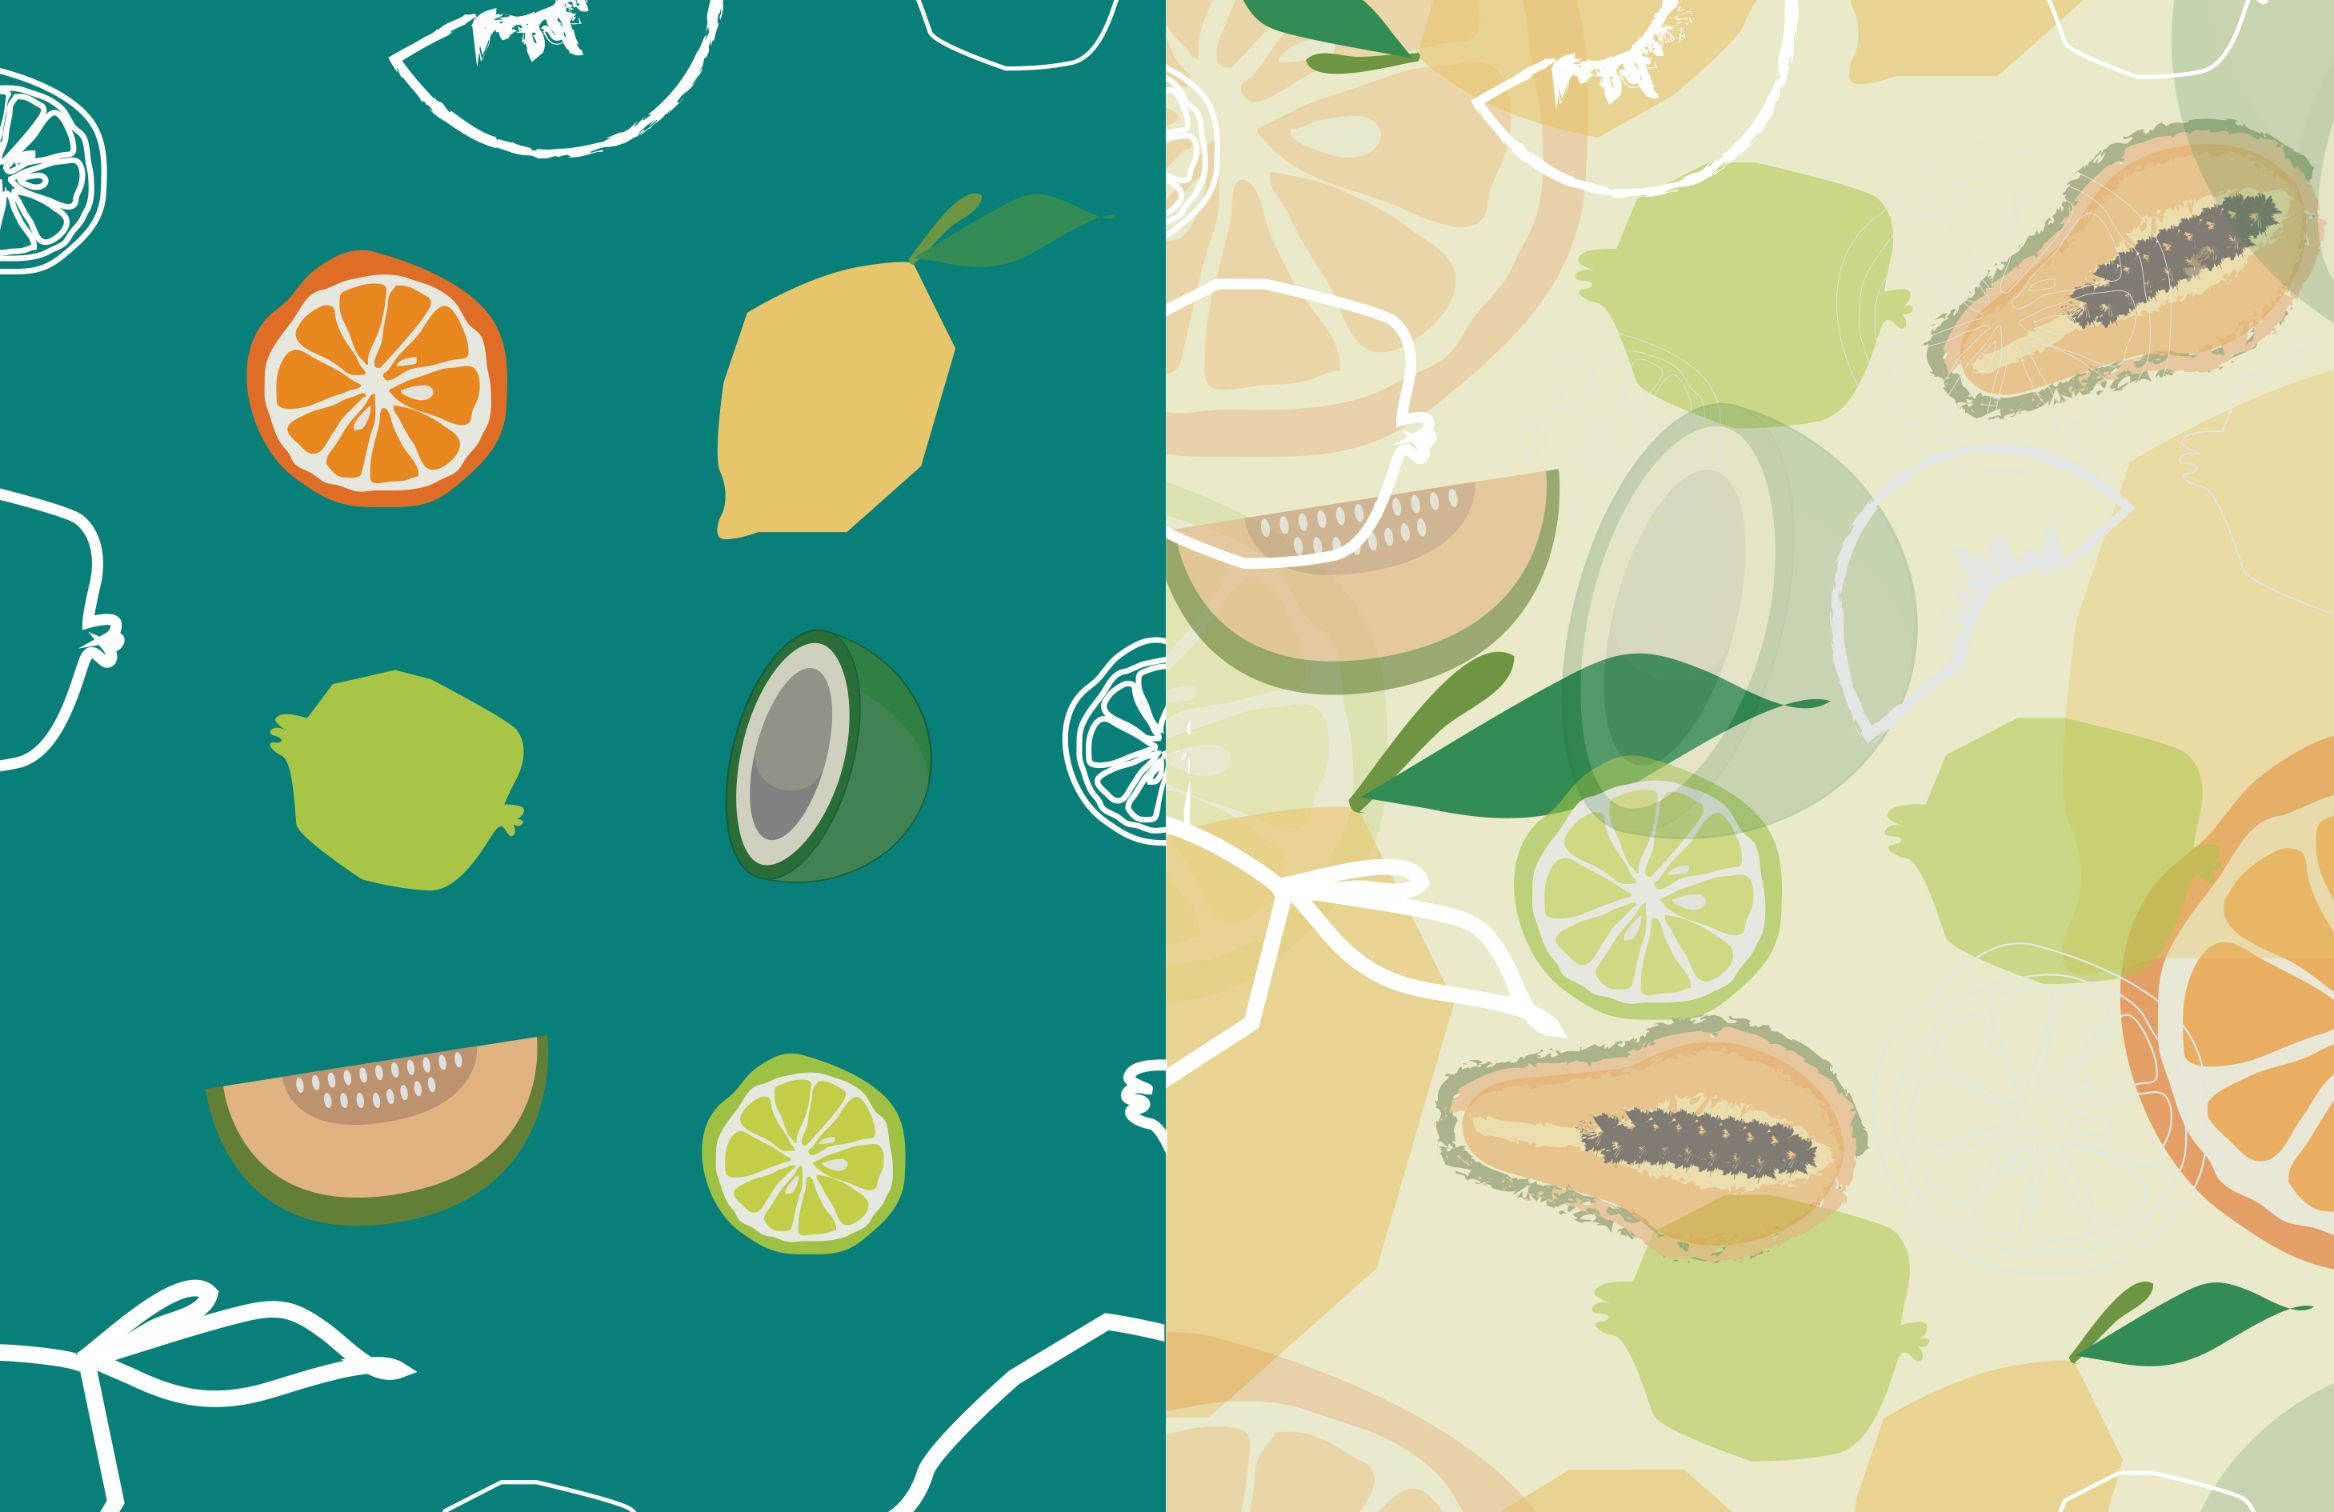 Illustrations of fruits in line art and vector art